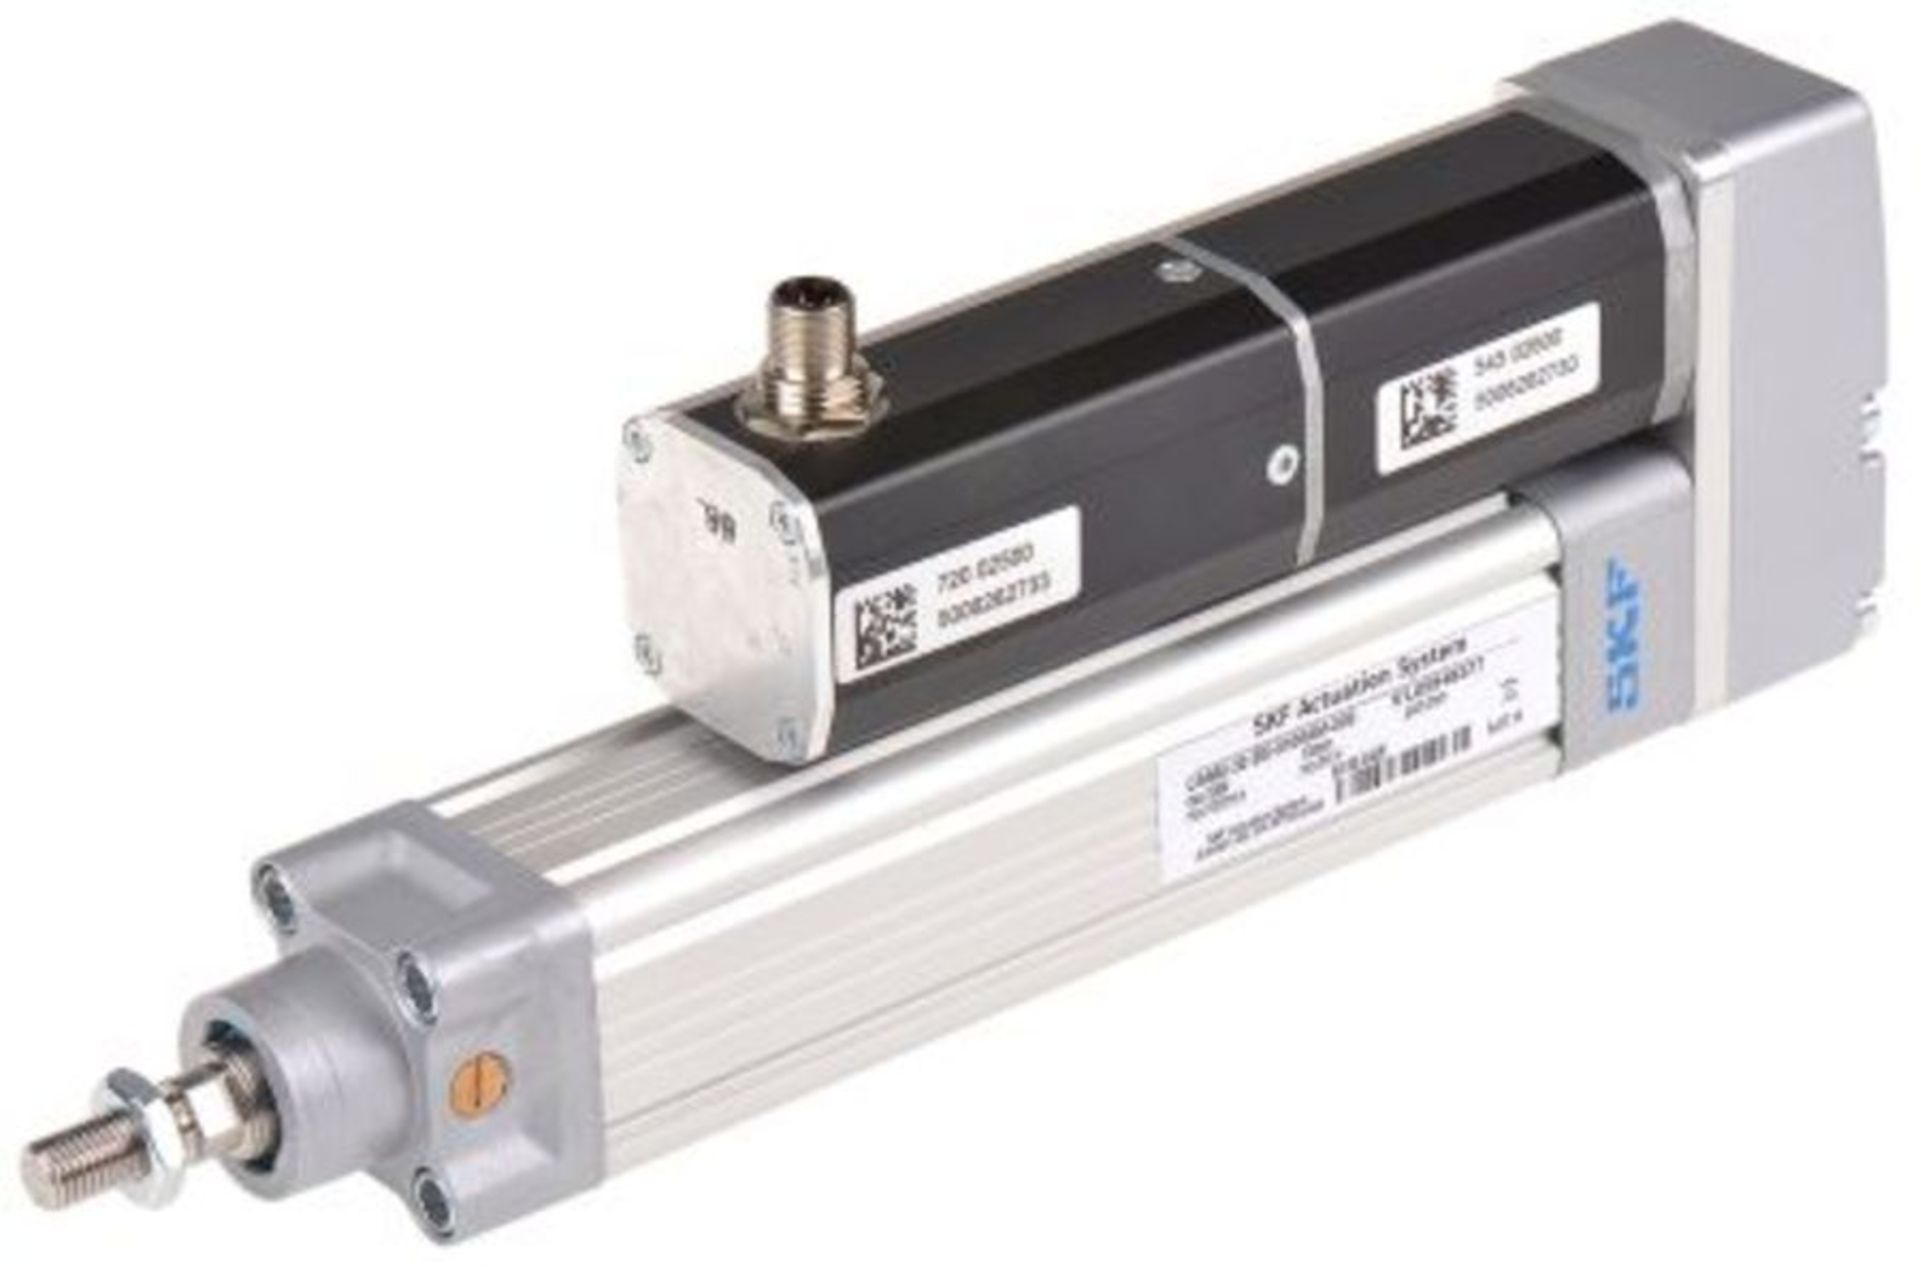 SKF Linear Actuator CASM-32 Series, 100mm stroke - 8802090 - Image 3 of 4